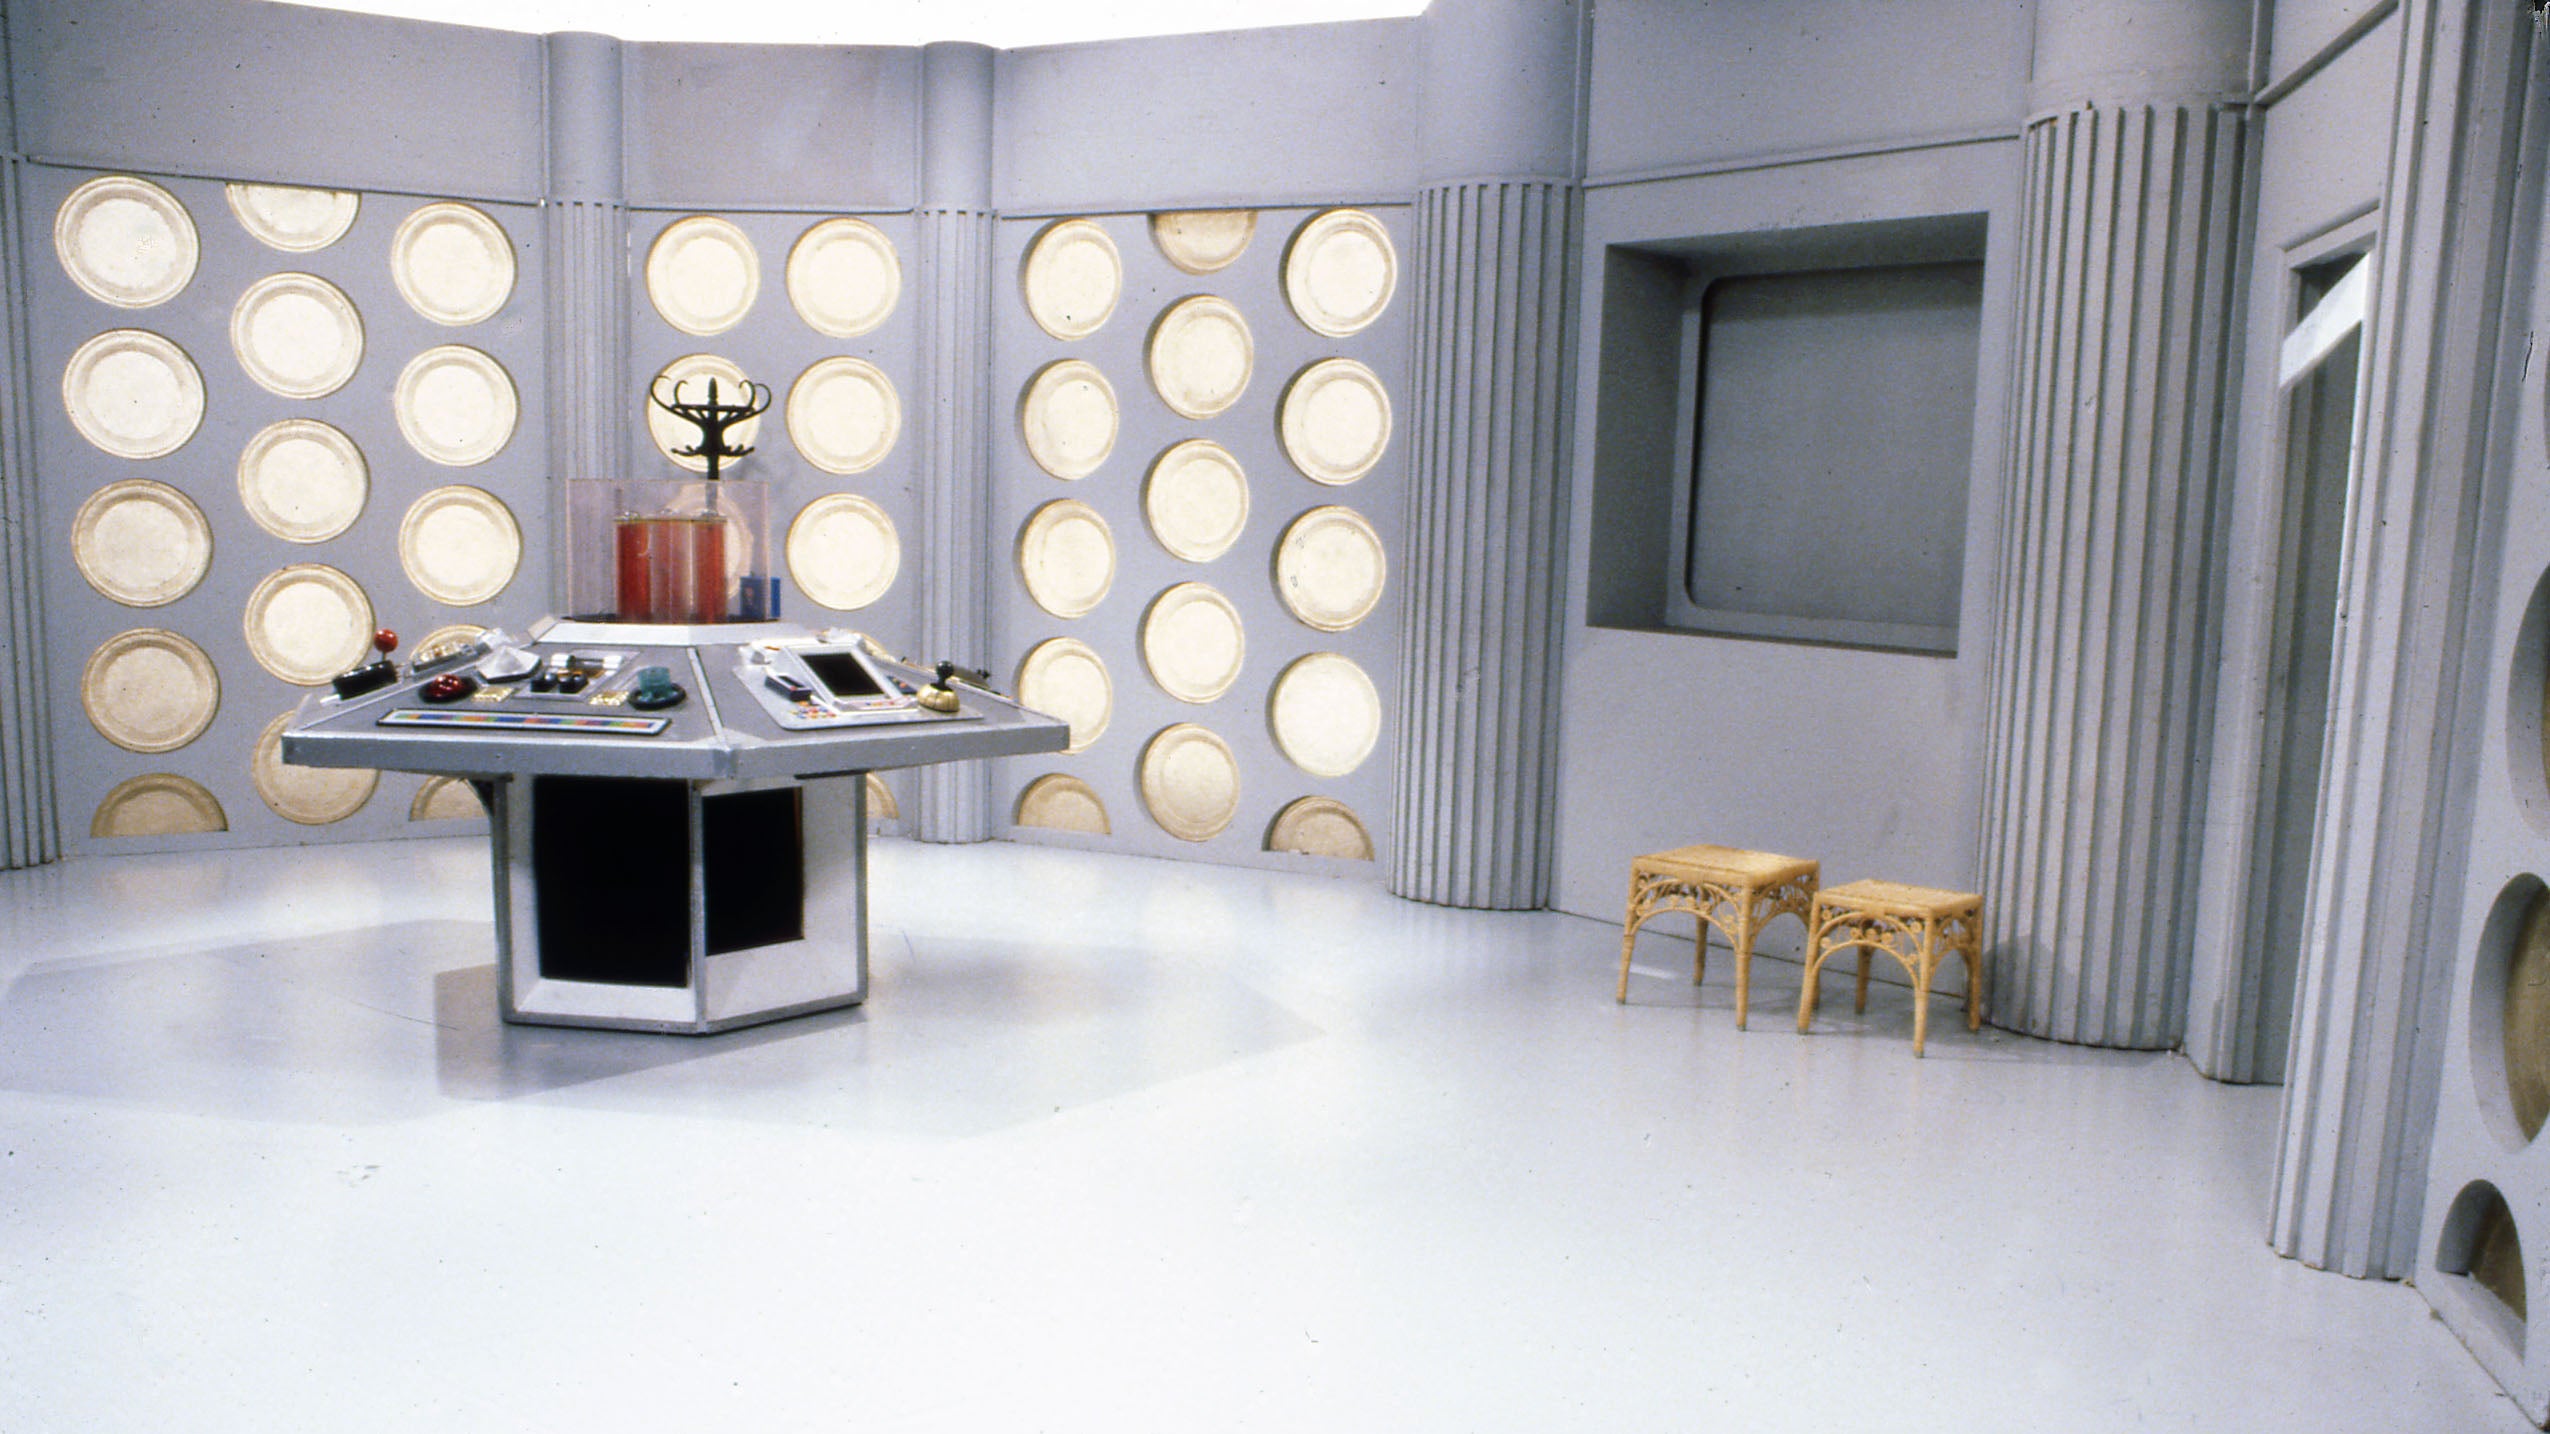 Attend A Zoom Meeting From Inside A TARDIS